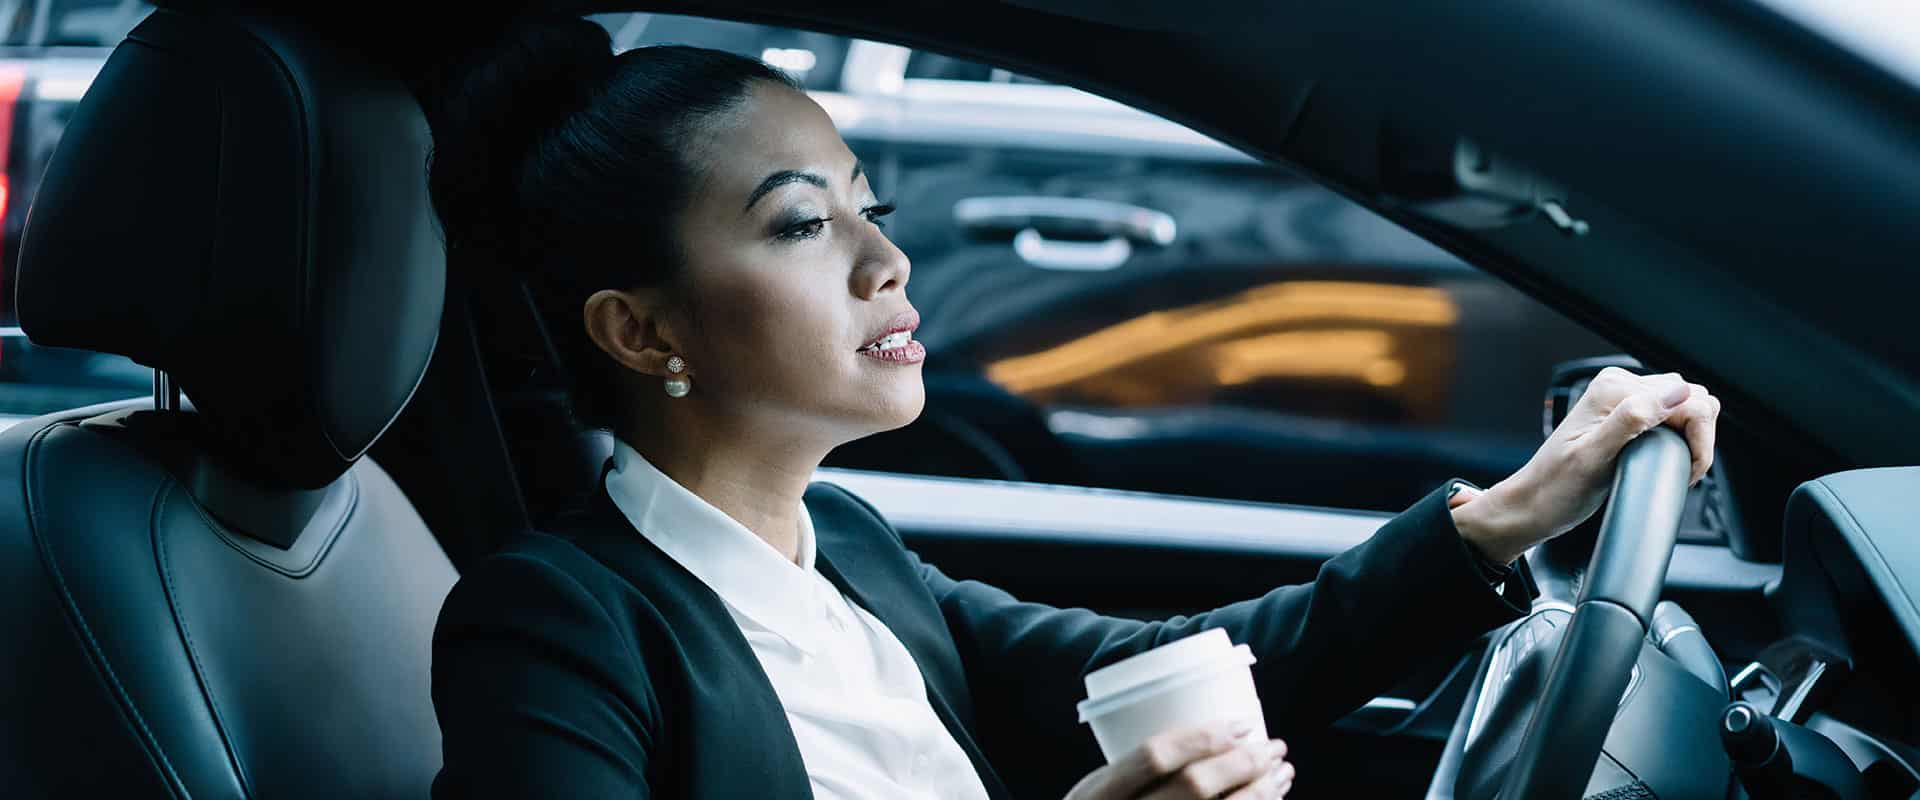 A woman driving a car holding a cup of coffee.